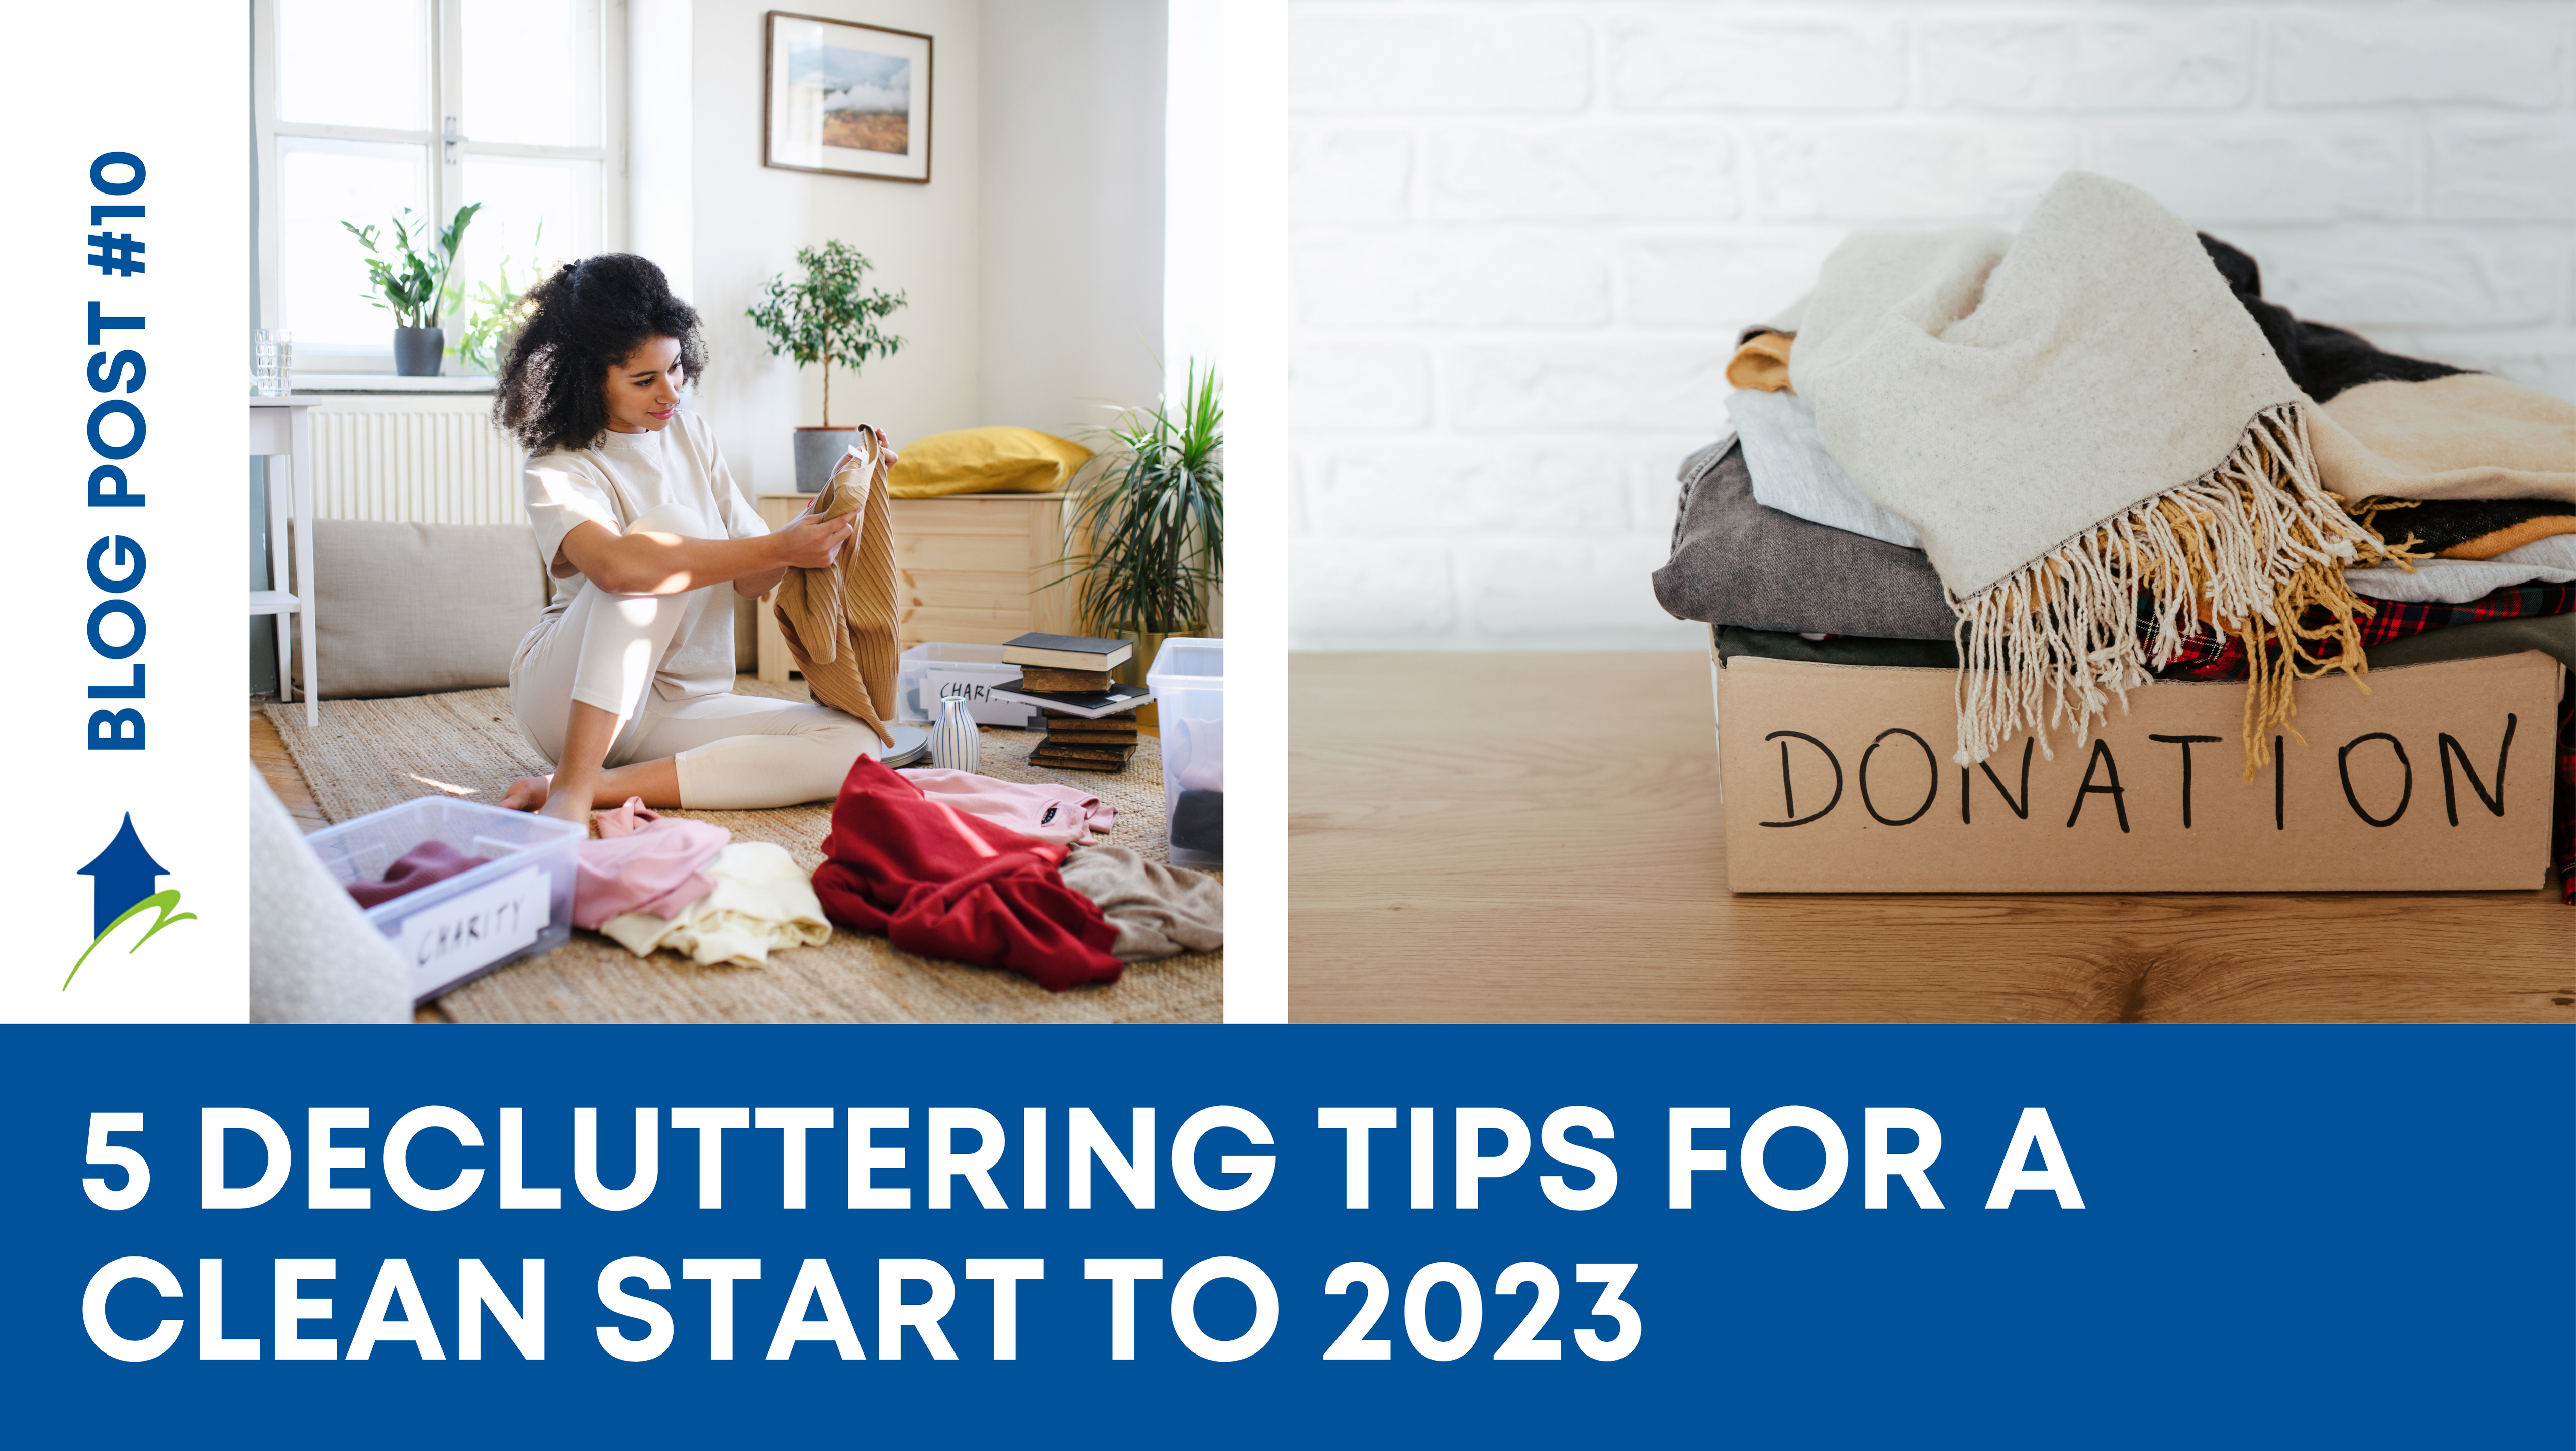 5 Decluttering Tips for a Clean Start to 2023